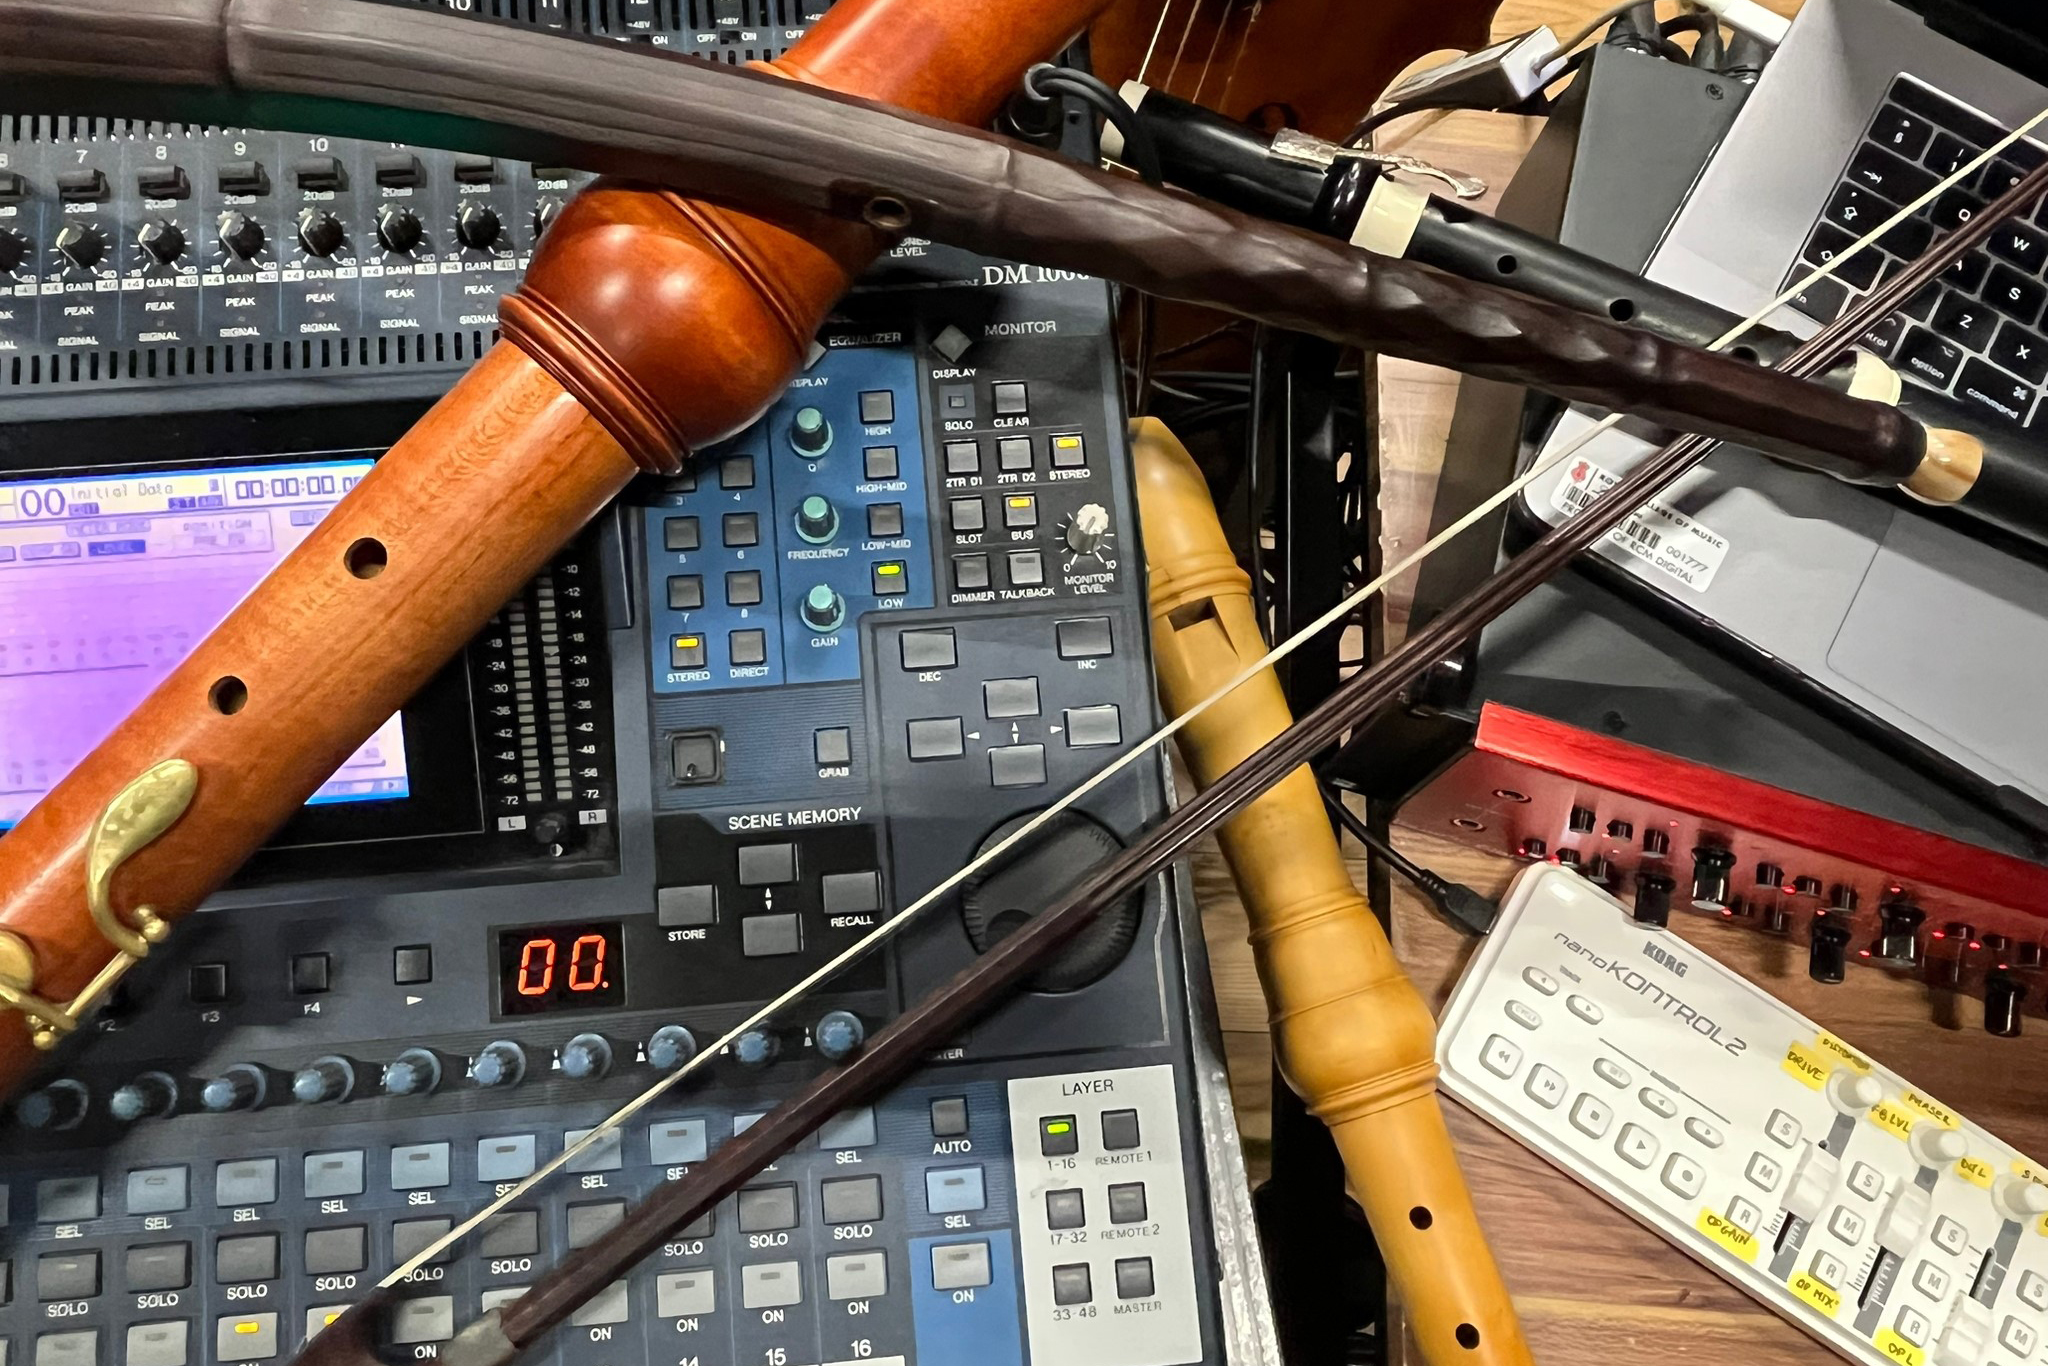 A photograph of historical instruments placed on top of electronic equipment